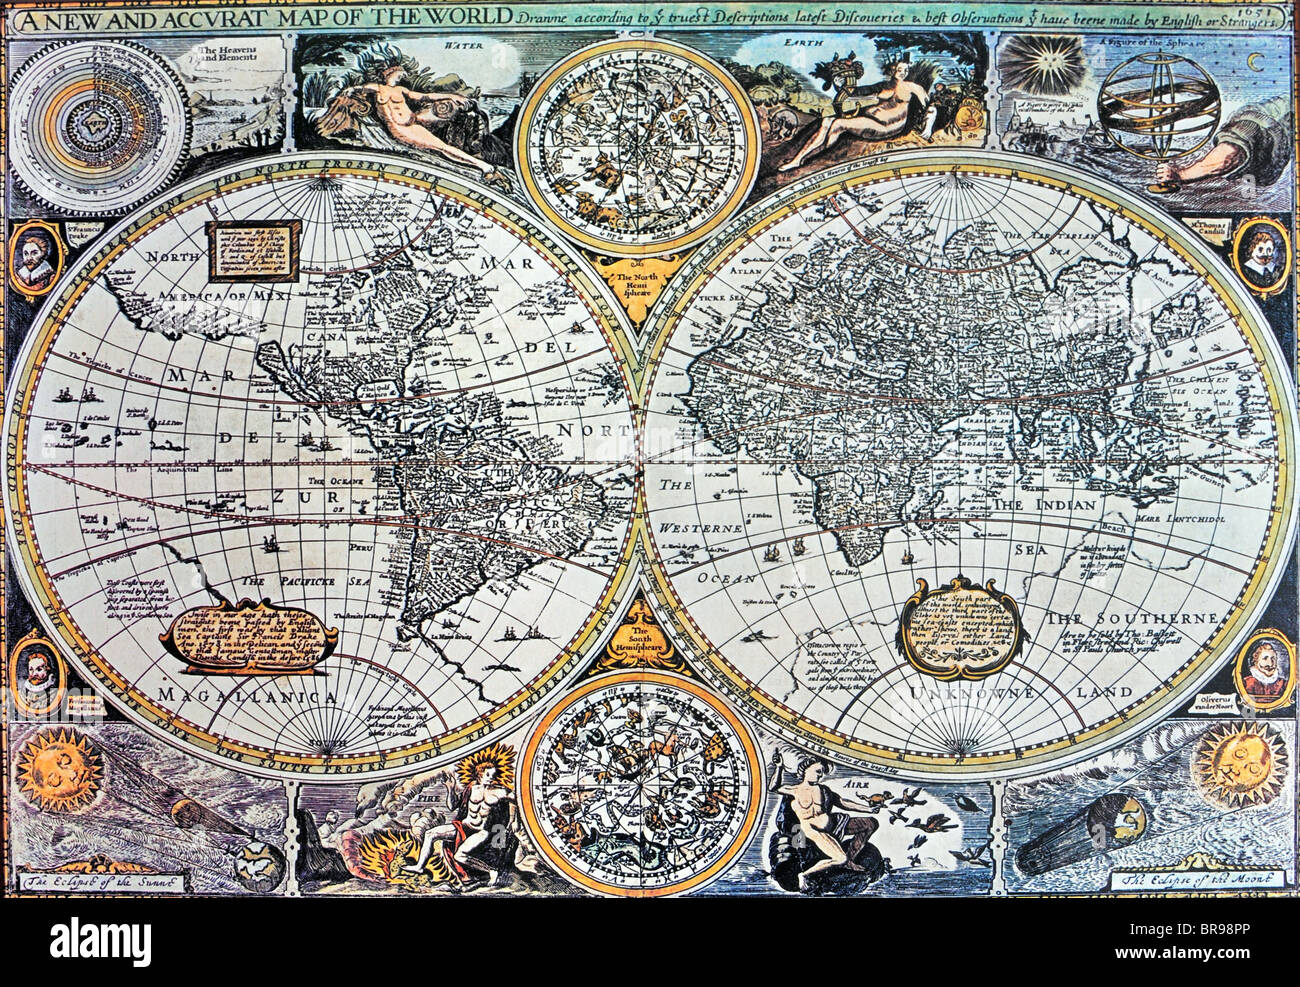 A copy of a European 17th century world  map showing the know world at that time. Stock Photo